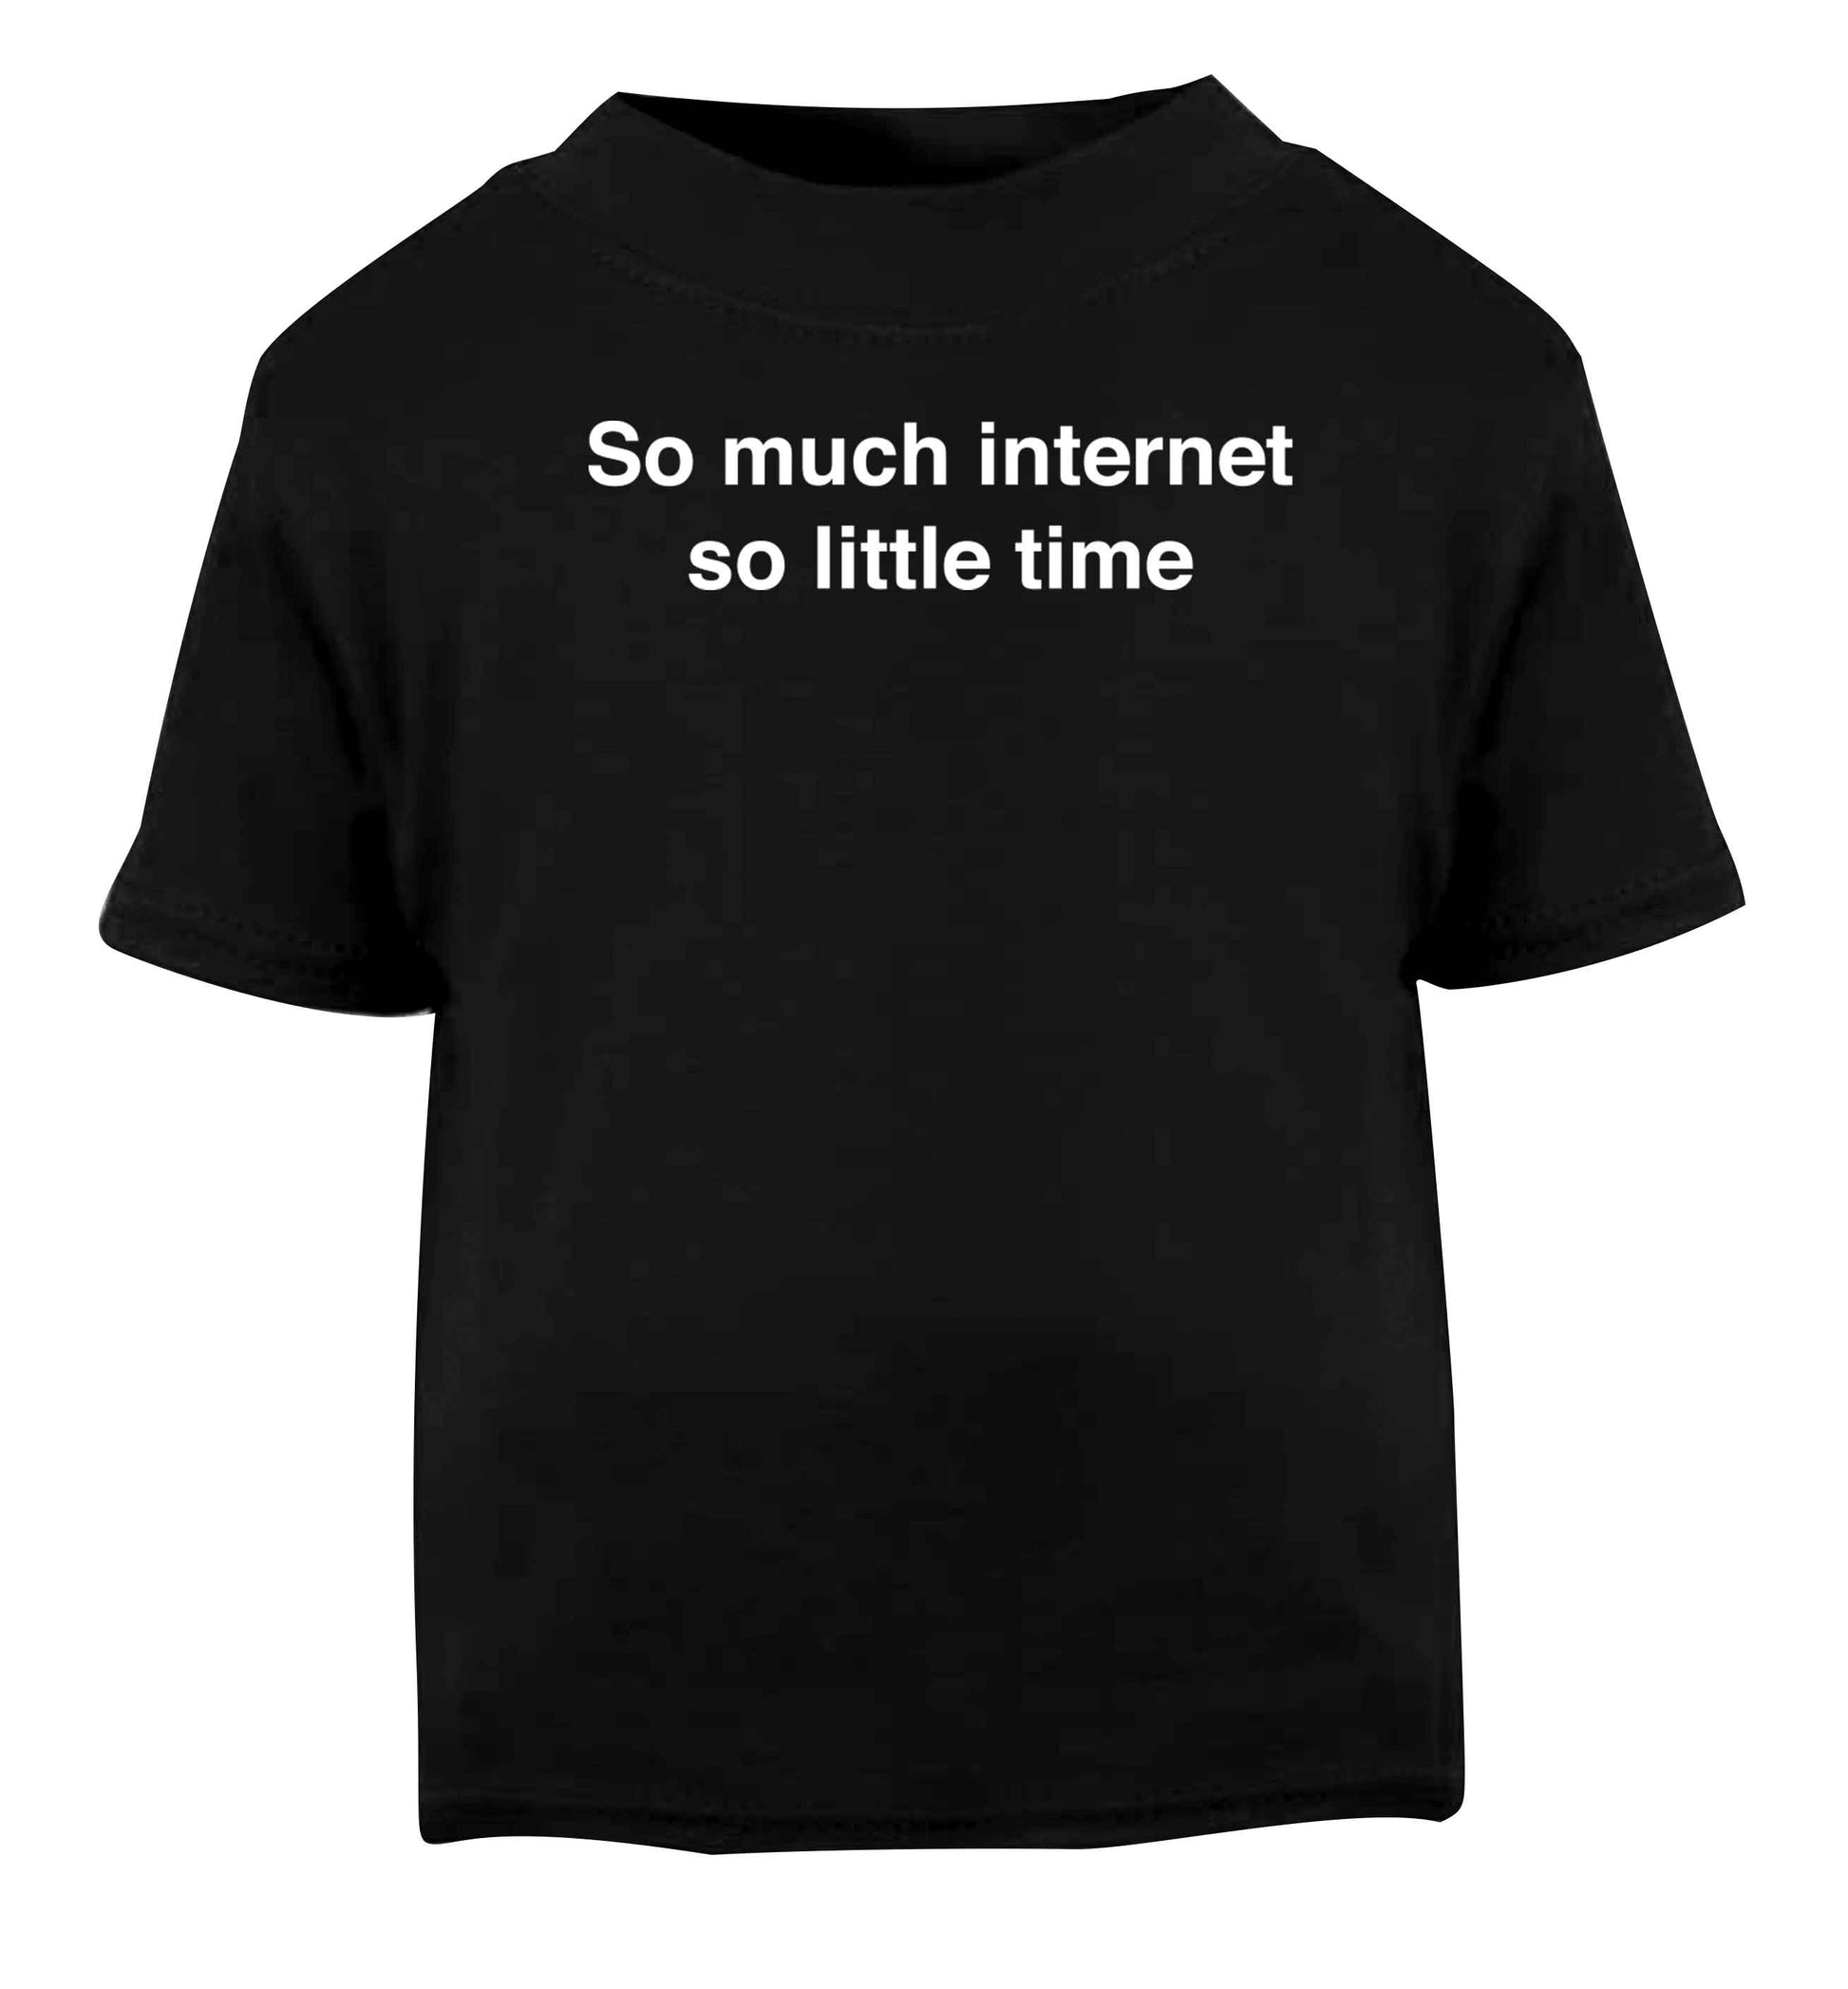 So much internet so little time Black baby toddler Tshirt 2 years